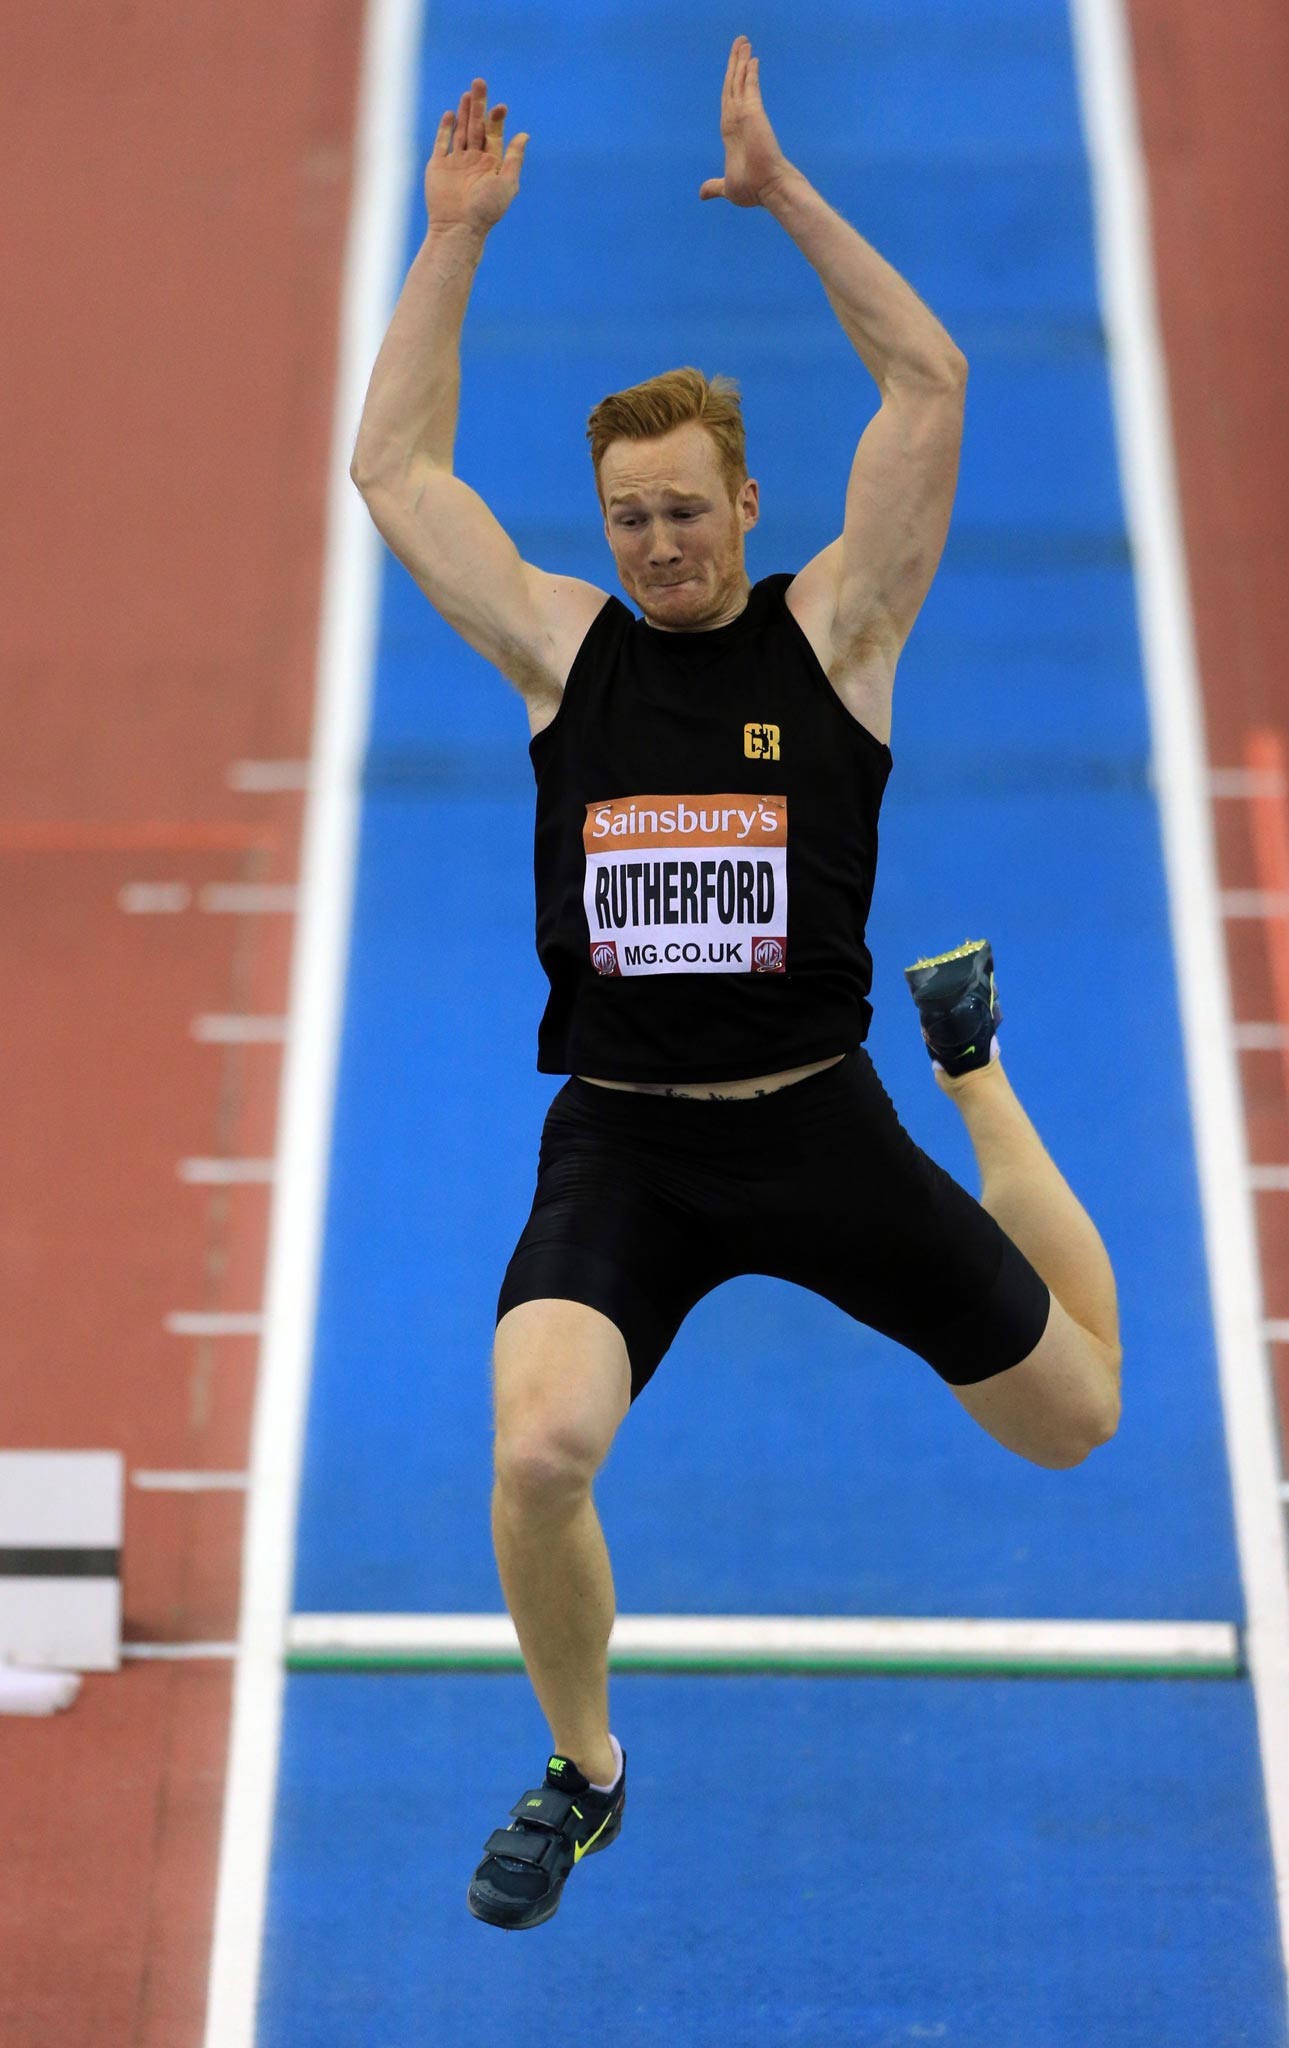 Greg Rutherford finished third in Saturday’s long jump in Birmingham